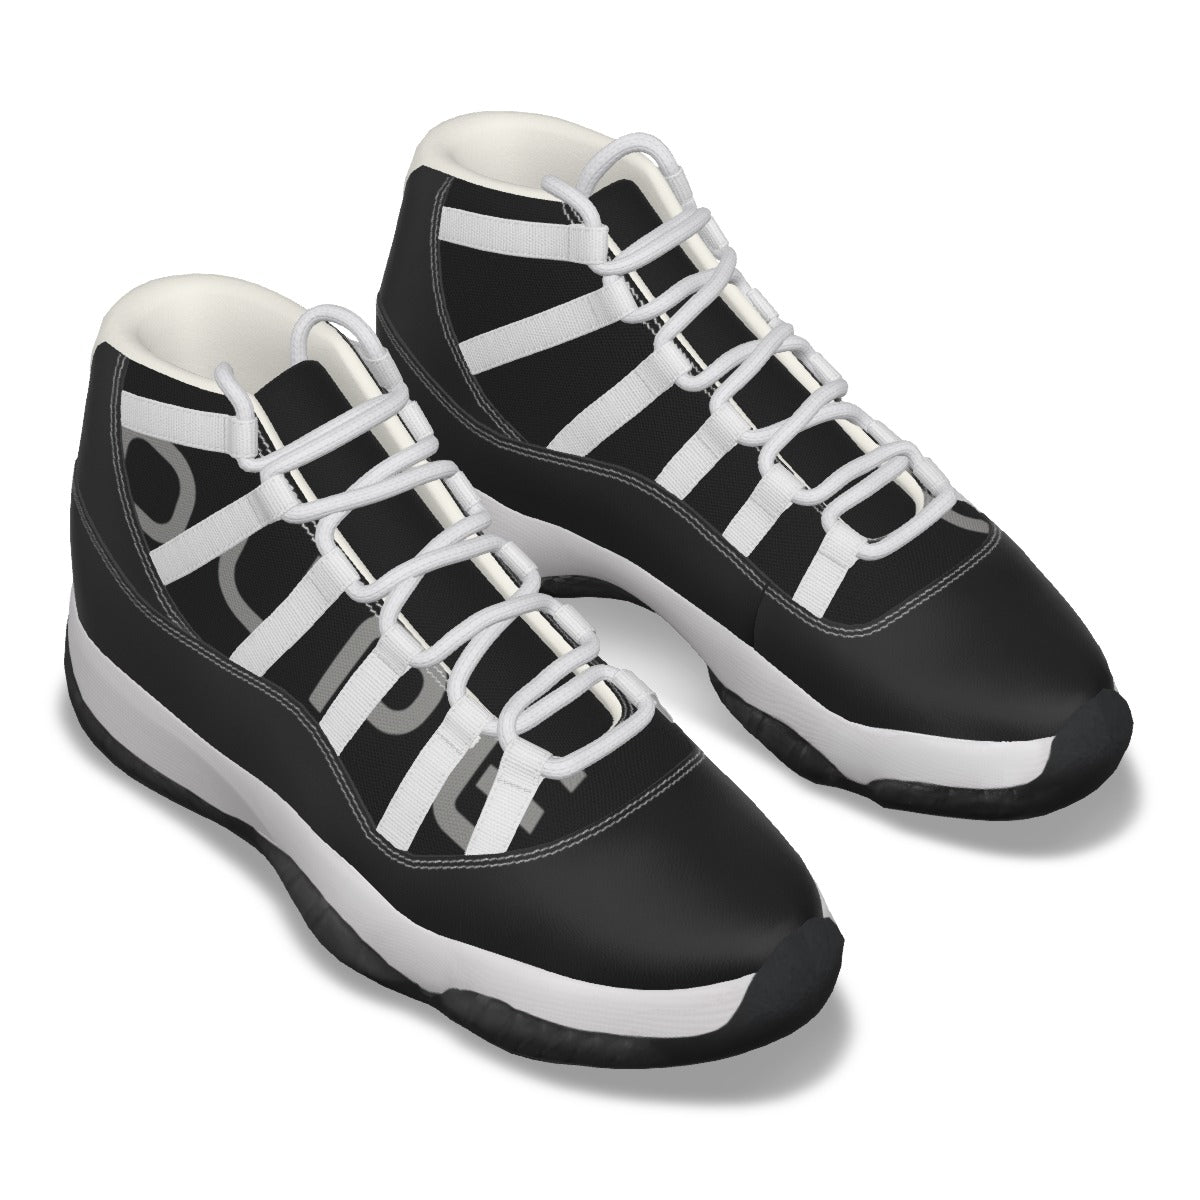 OUPE Men's High Top Basketball Shoes